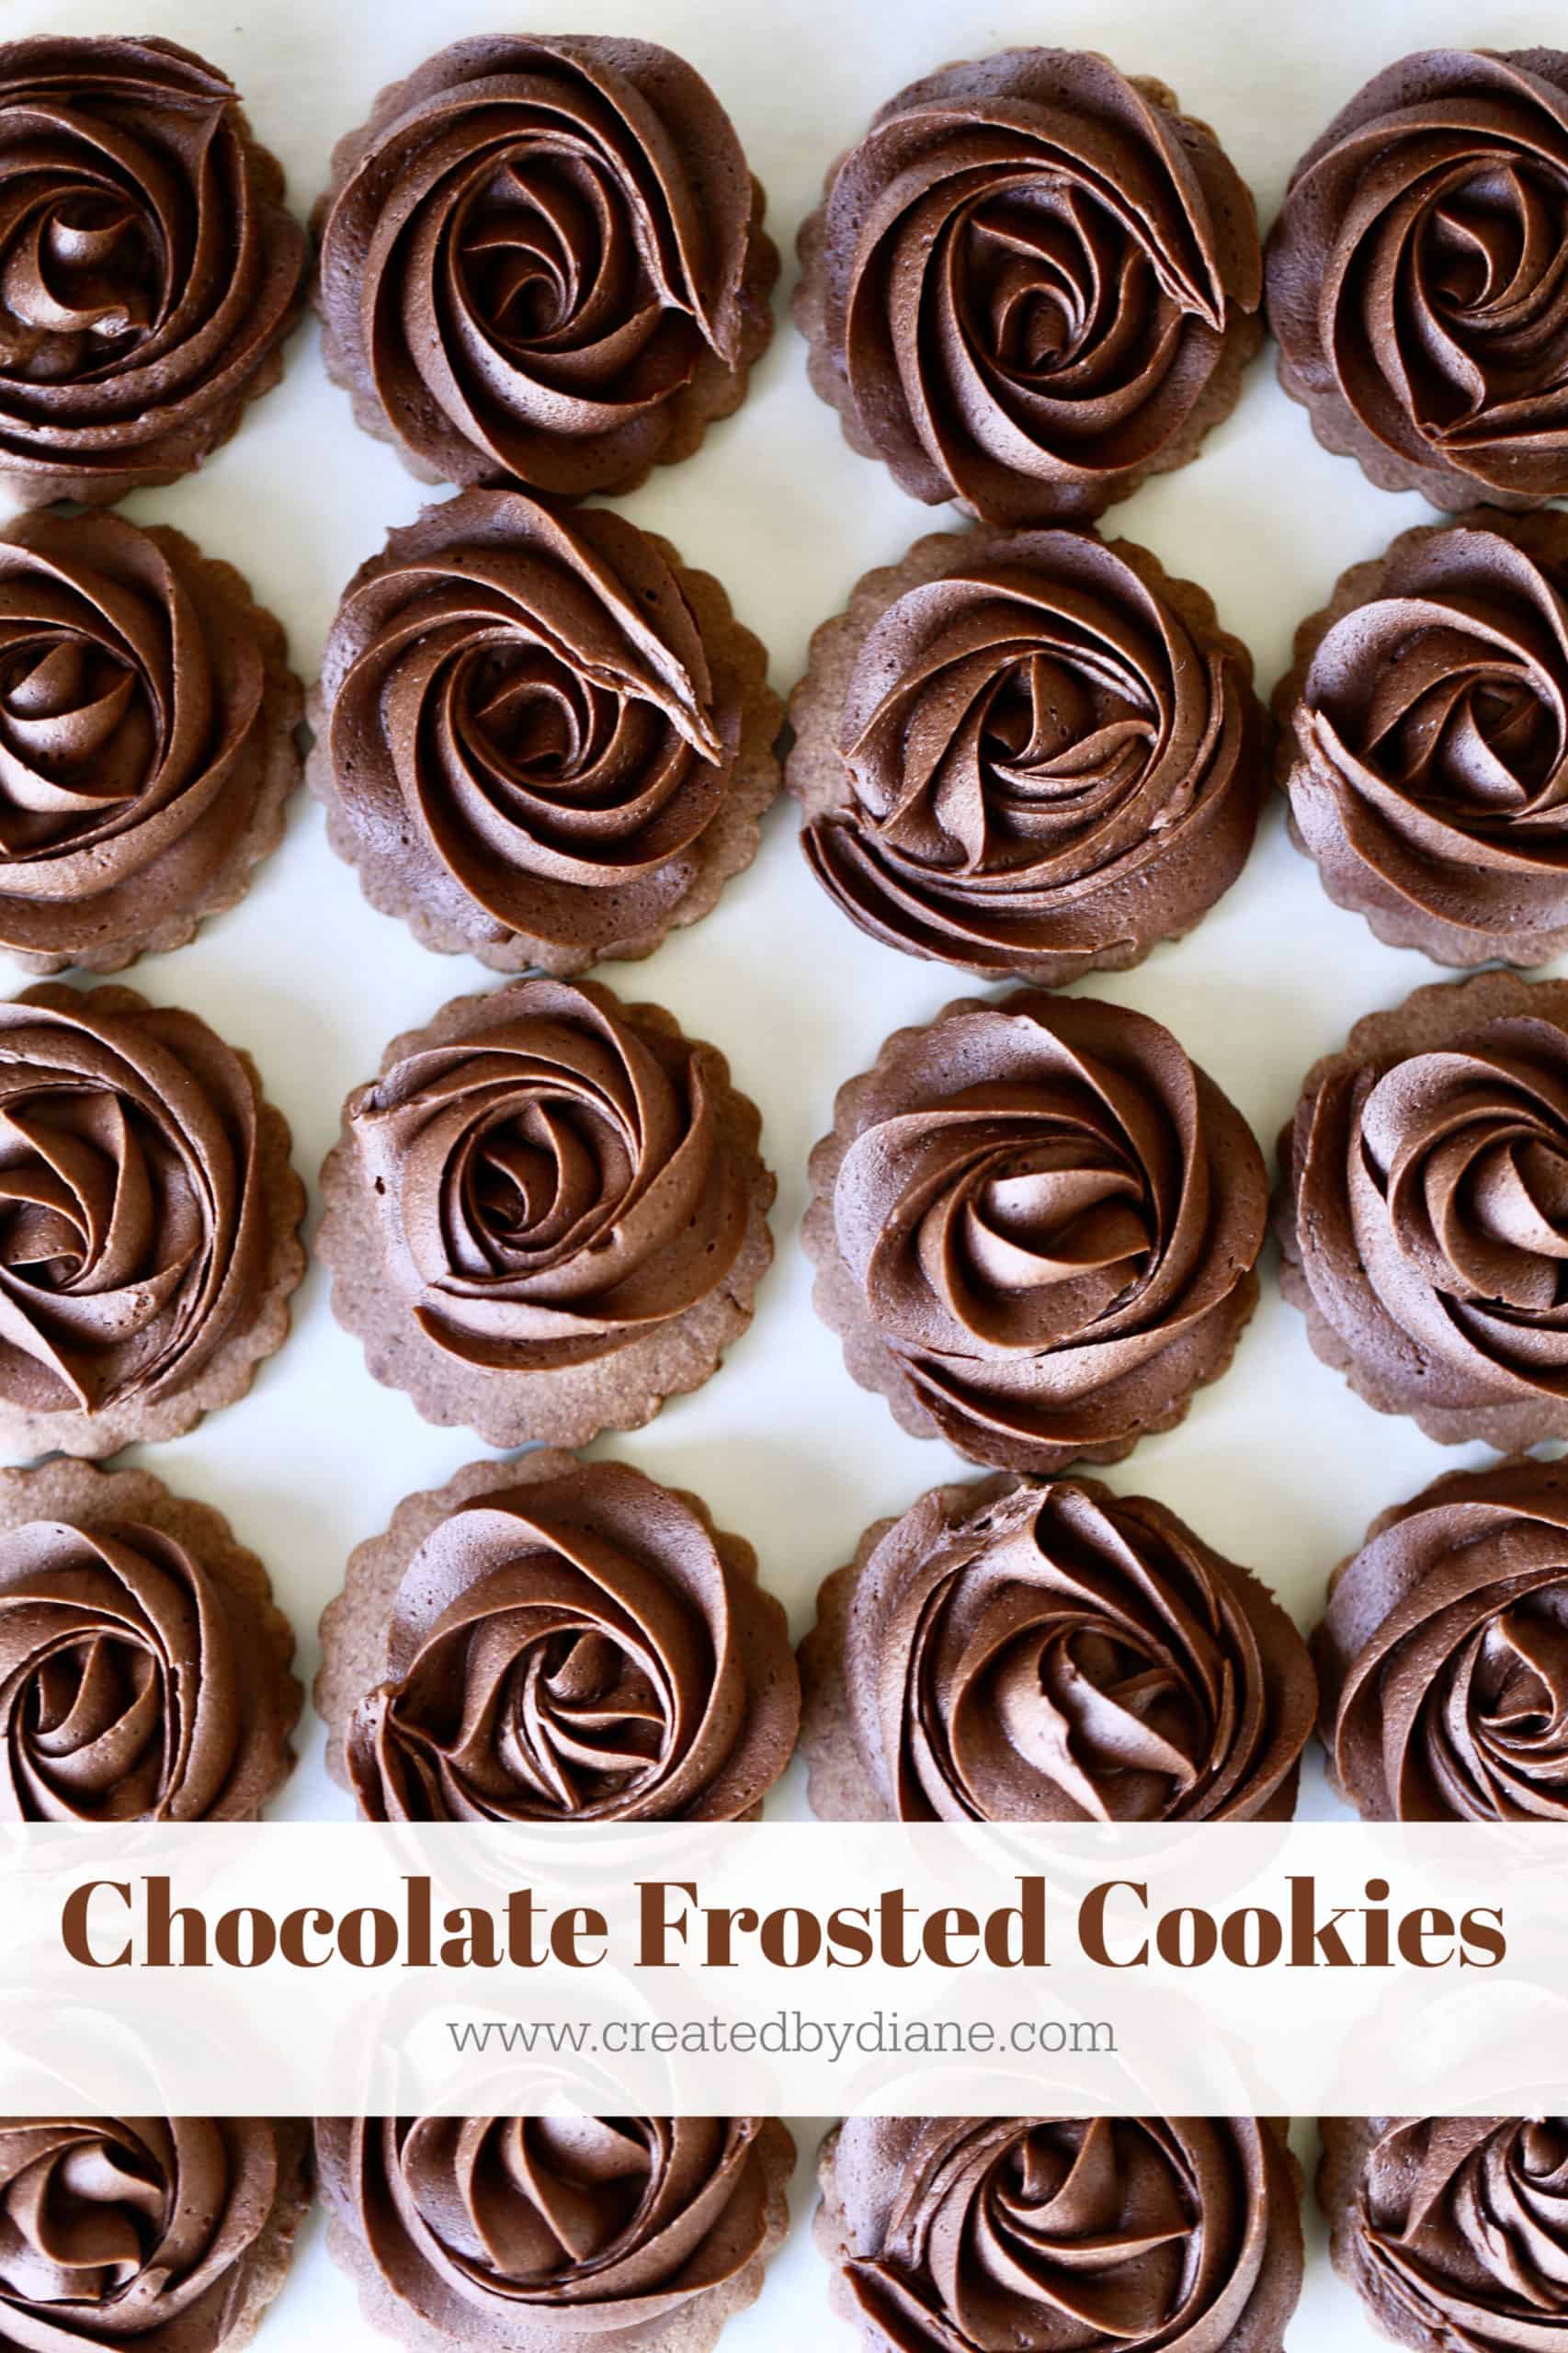 Chocolate Frosted Cookies